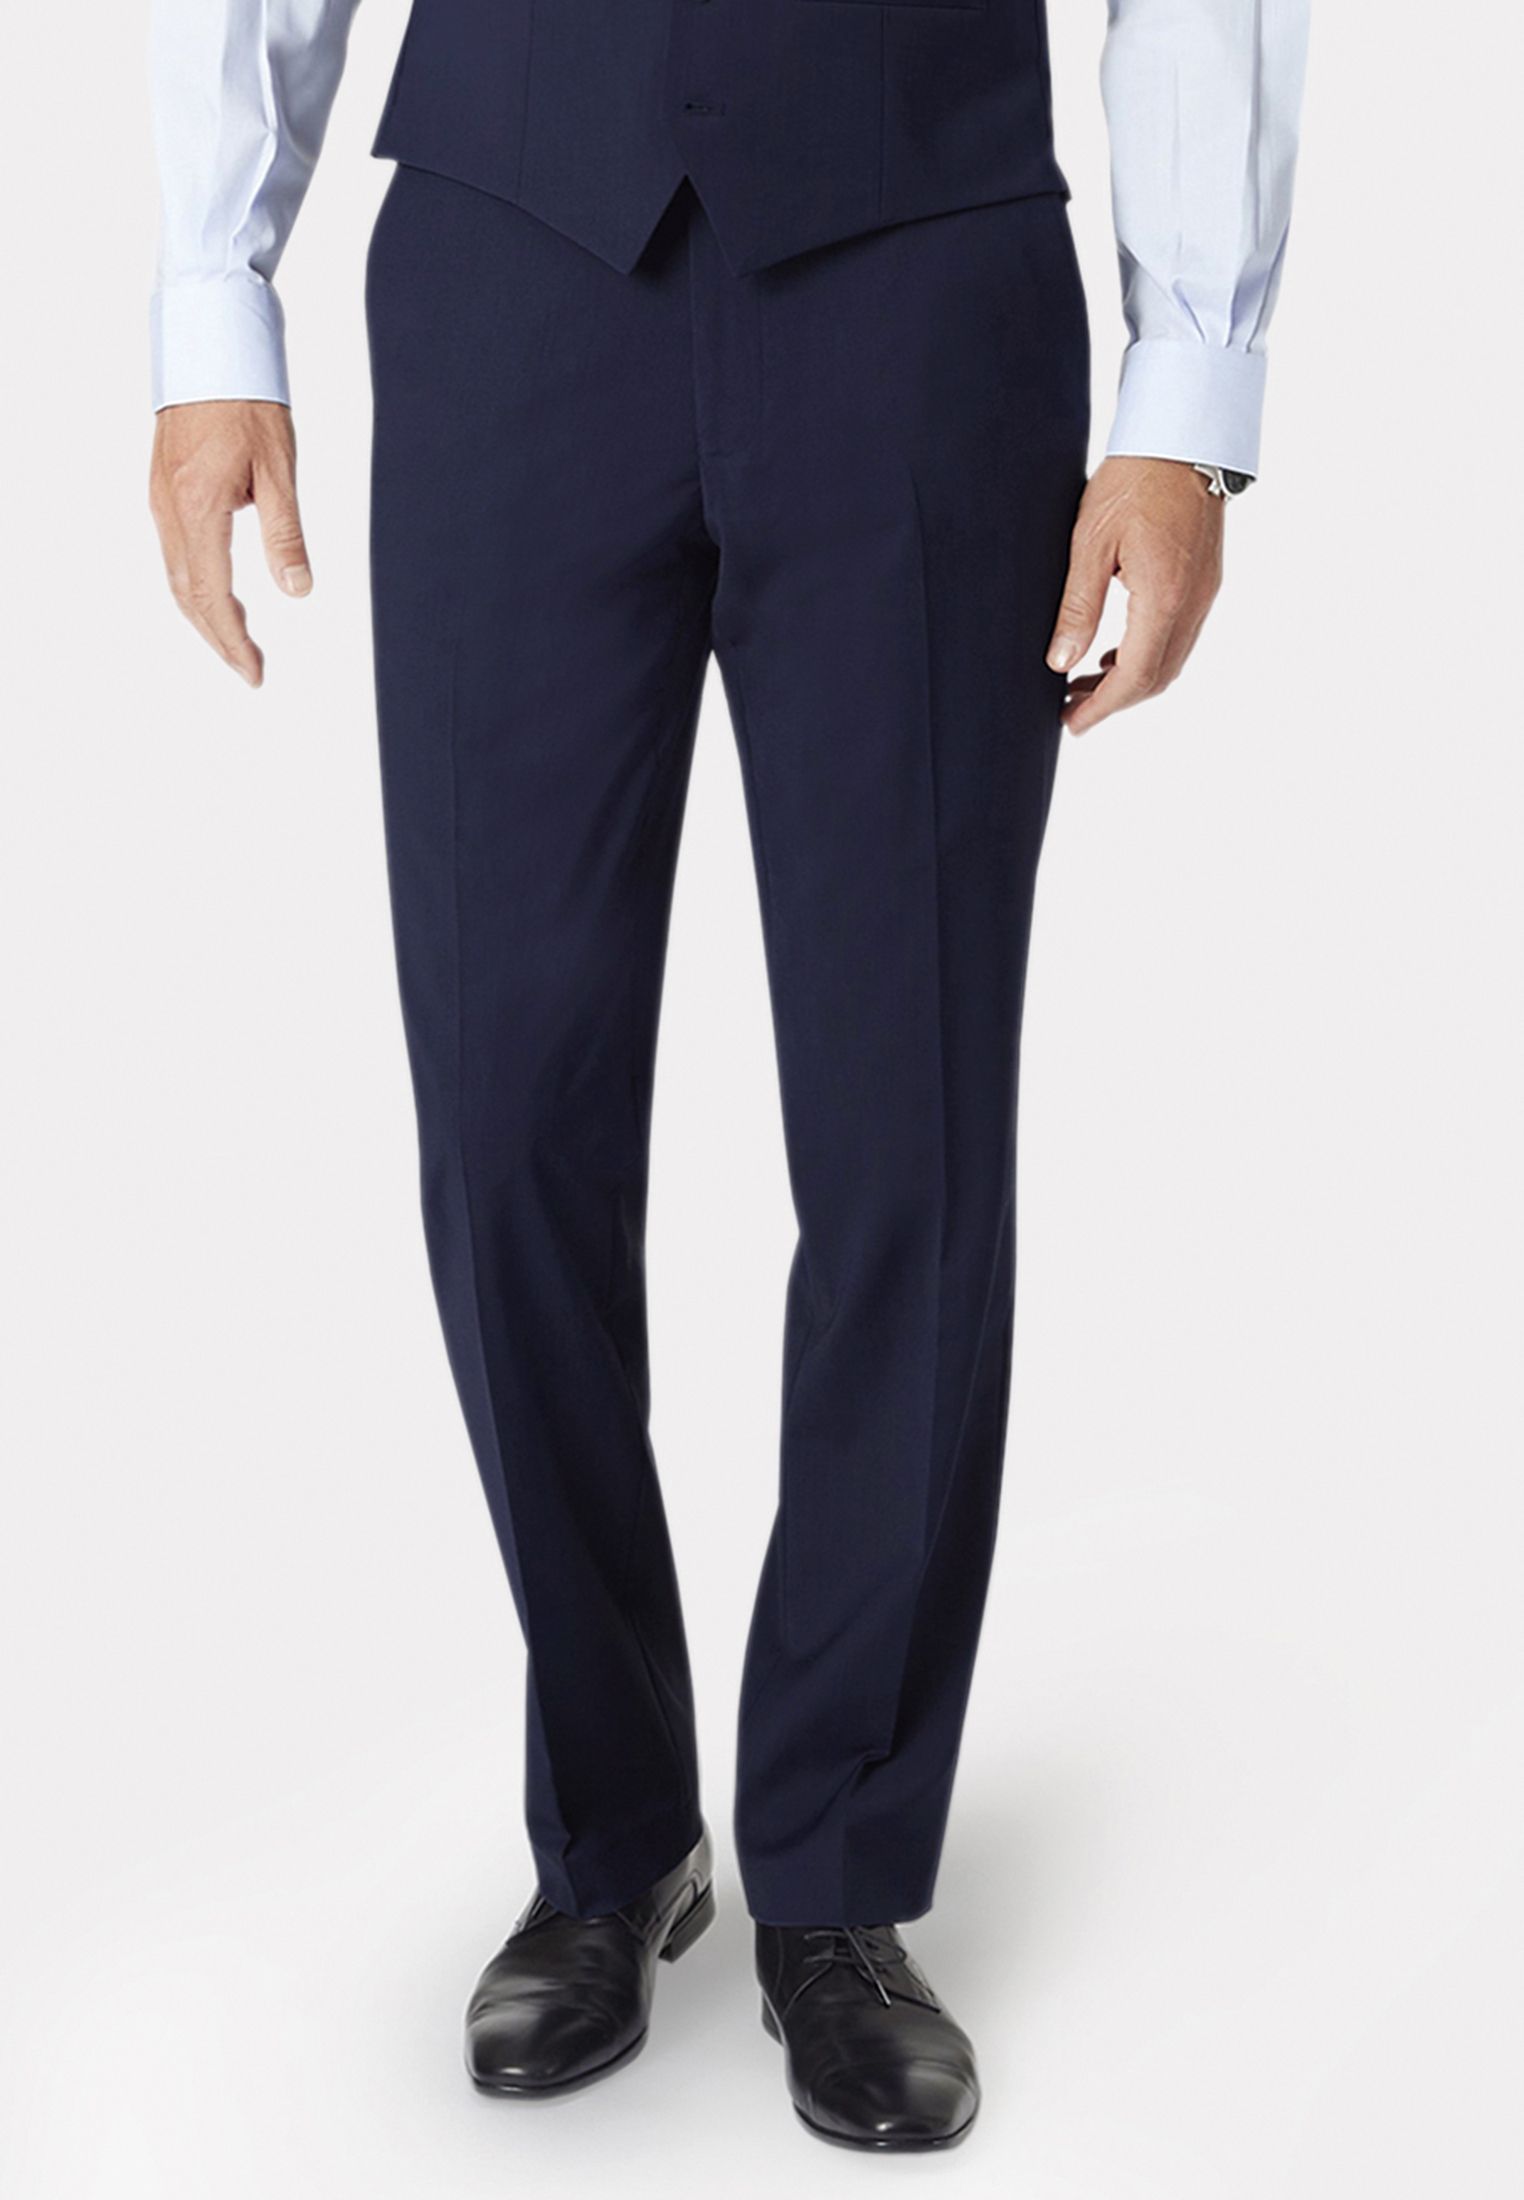 Selected Homme slim fit wool mix suit pants in gray | ASOS